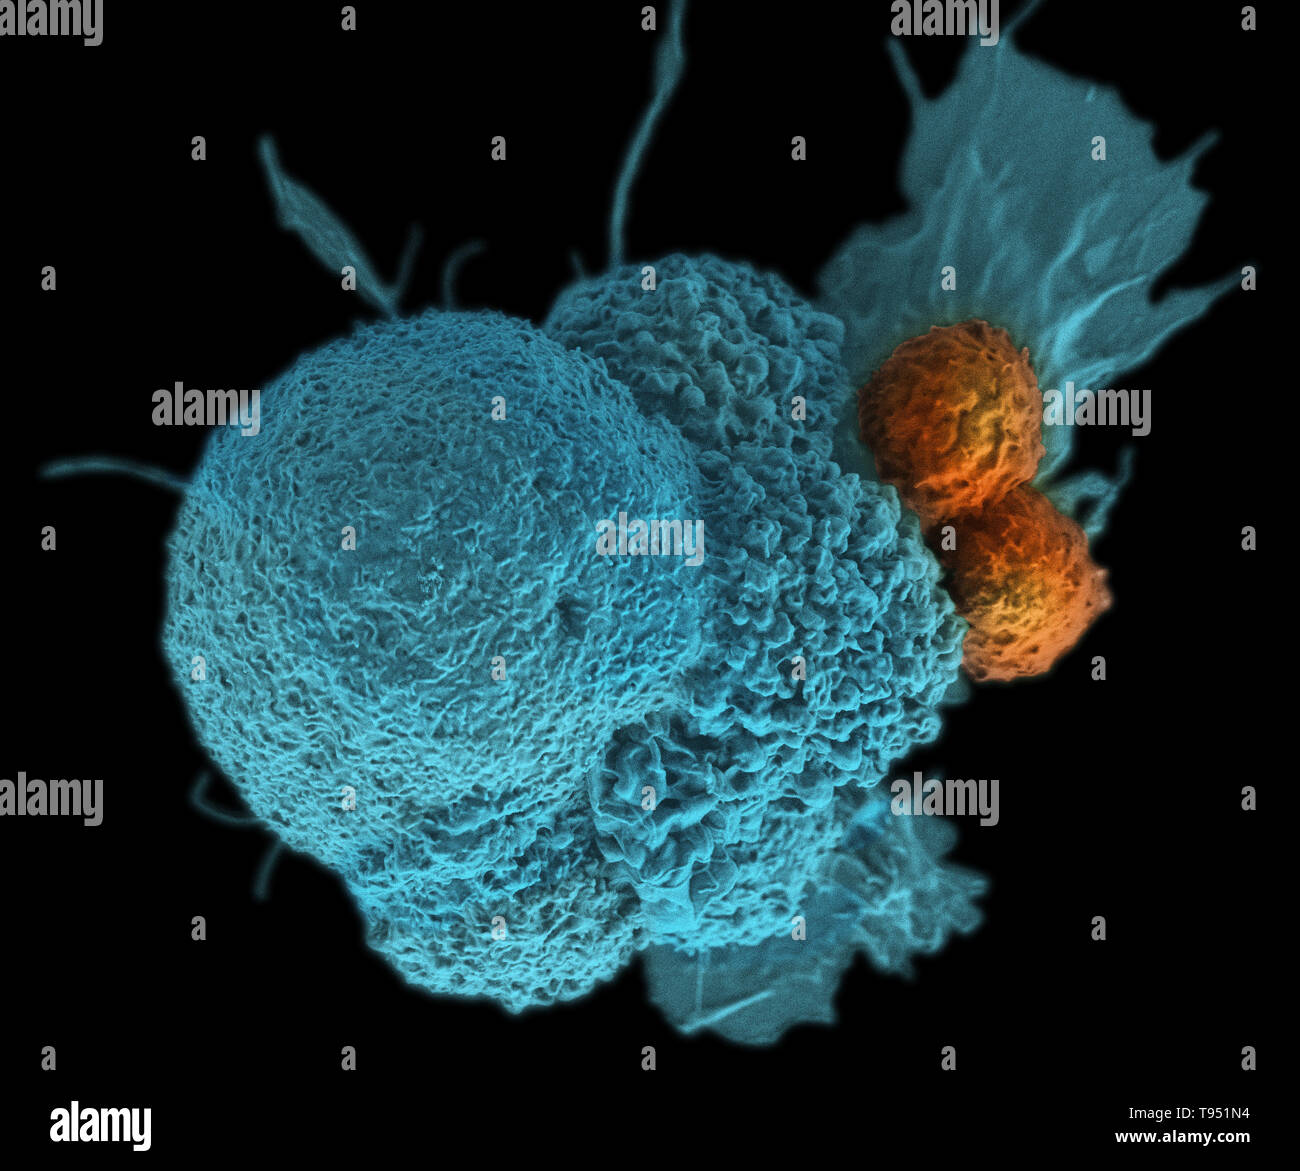 This electron micrograph (SEM) shows an oral squamous cancer cell (blue) being attacked by two cytotoxic T cells (orange). The tumor-specific T cells were developed from the patient's own immune system, a personalized cancer vaccine like those that may be developed in the future with the help of NIST's standardized human genomes. This image has been colorized. Stock Photo